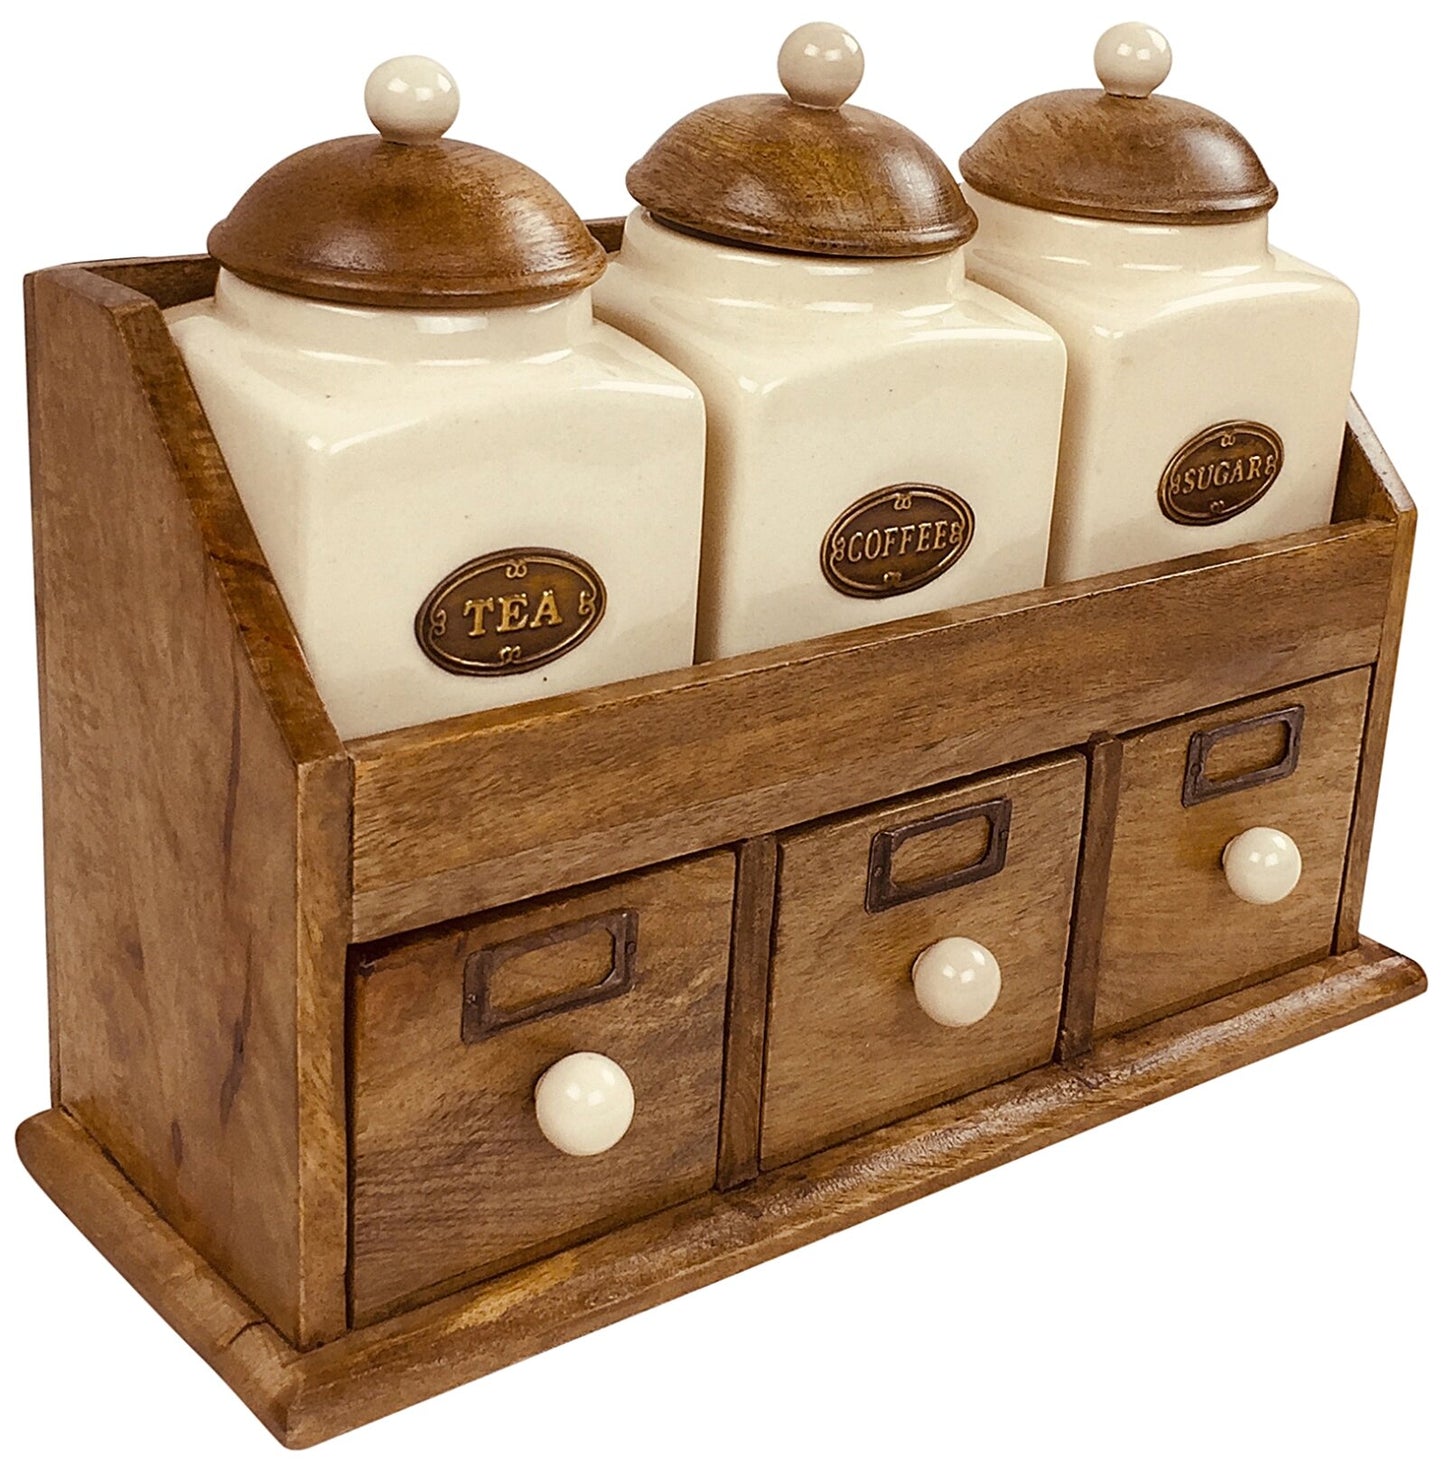 Three Ceramic Jars With Wooden Drawers